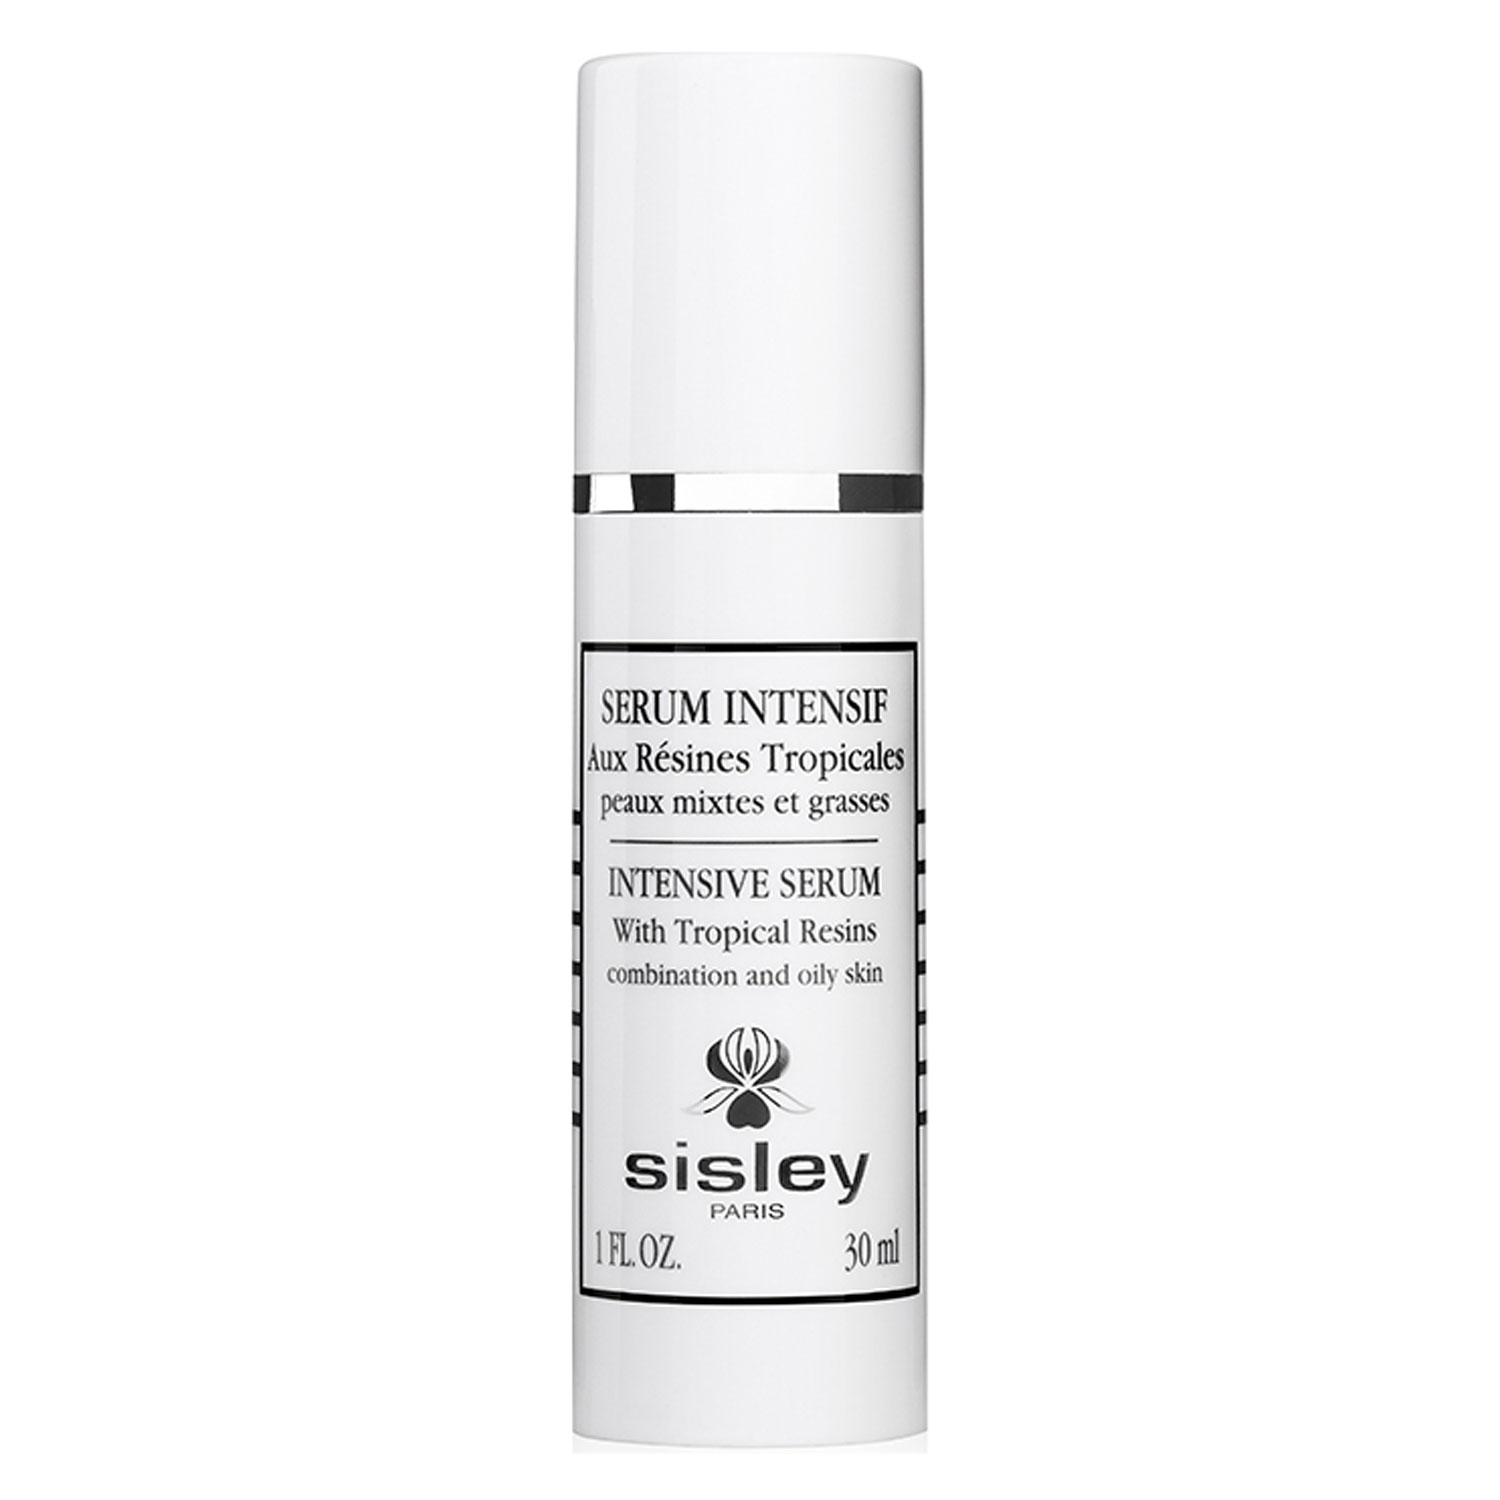 Product image from Sisley Skincare - Sérum Intensif aux Résines Tropicales